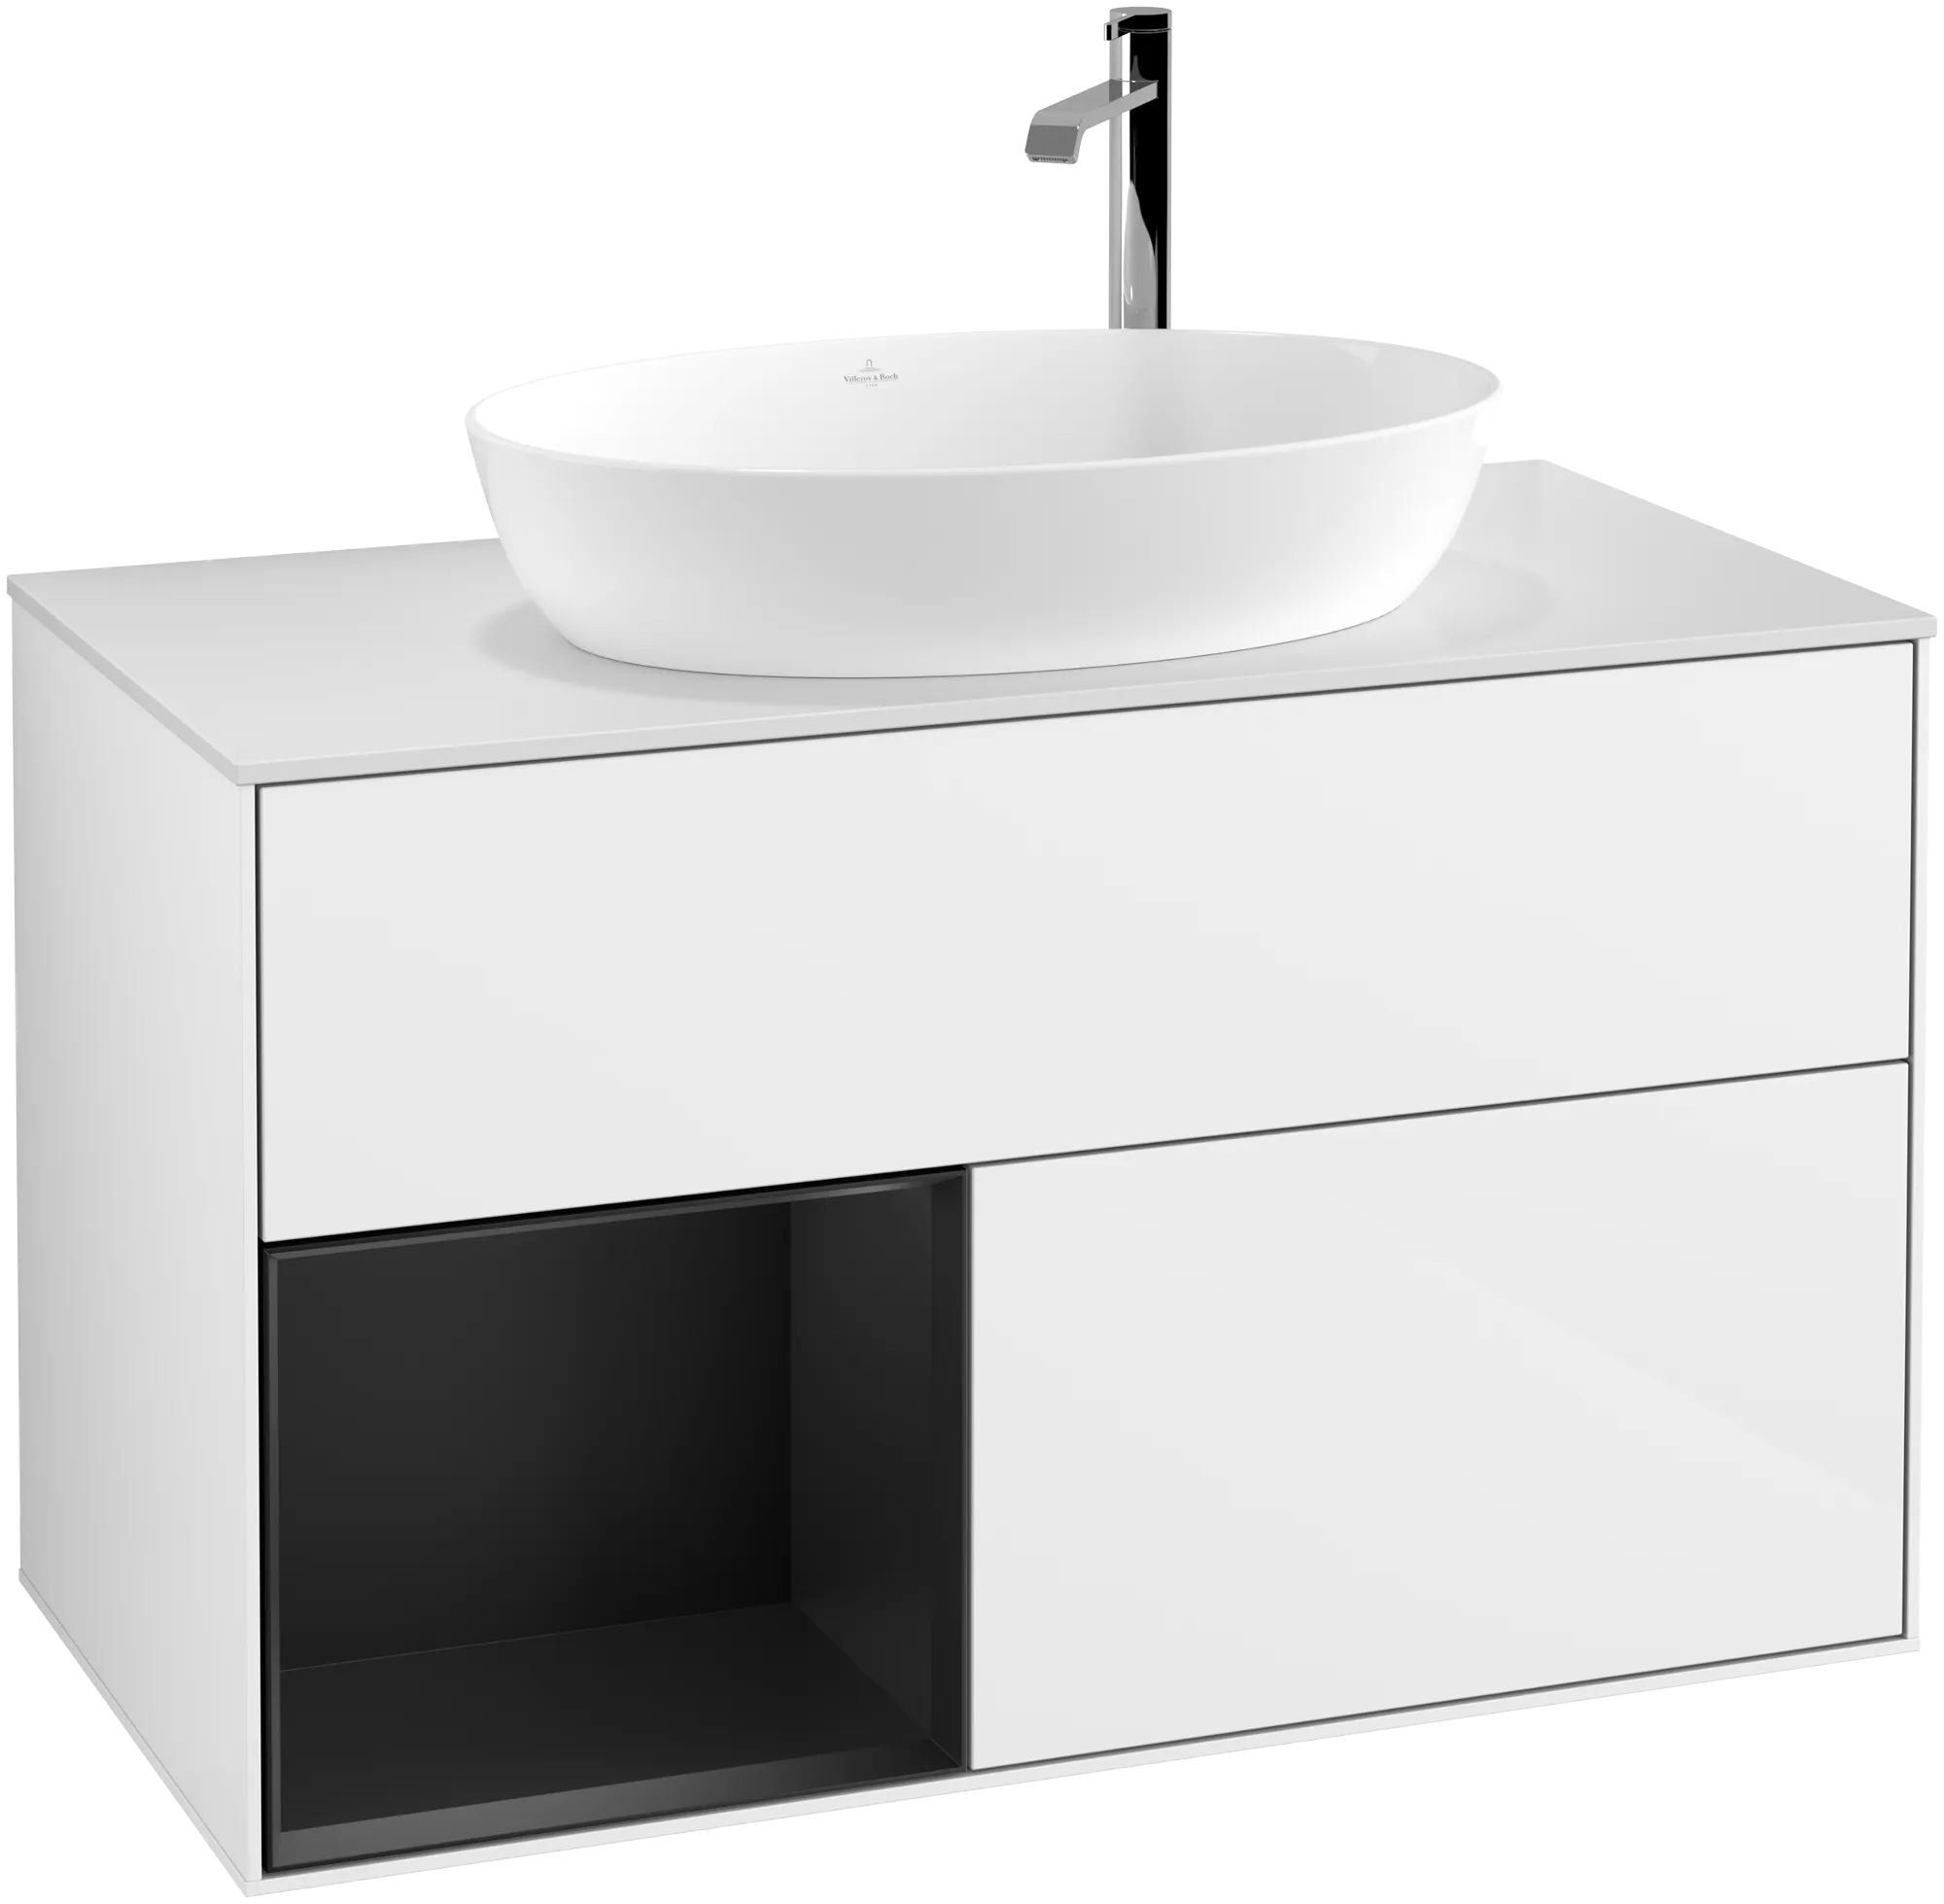 Picture of VILLEROY BOCH Finion Vanity unit, with lighting, 2 pull-out compartments, 1000 x 603 x 501 mm, Glossy White Lacquer / Black Matt Lacquer / Glass White Matt #G891PDGF